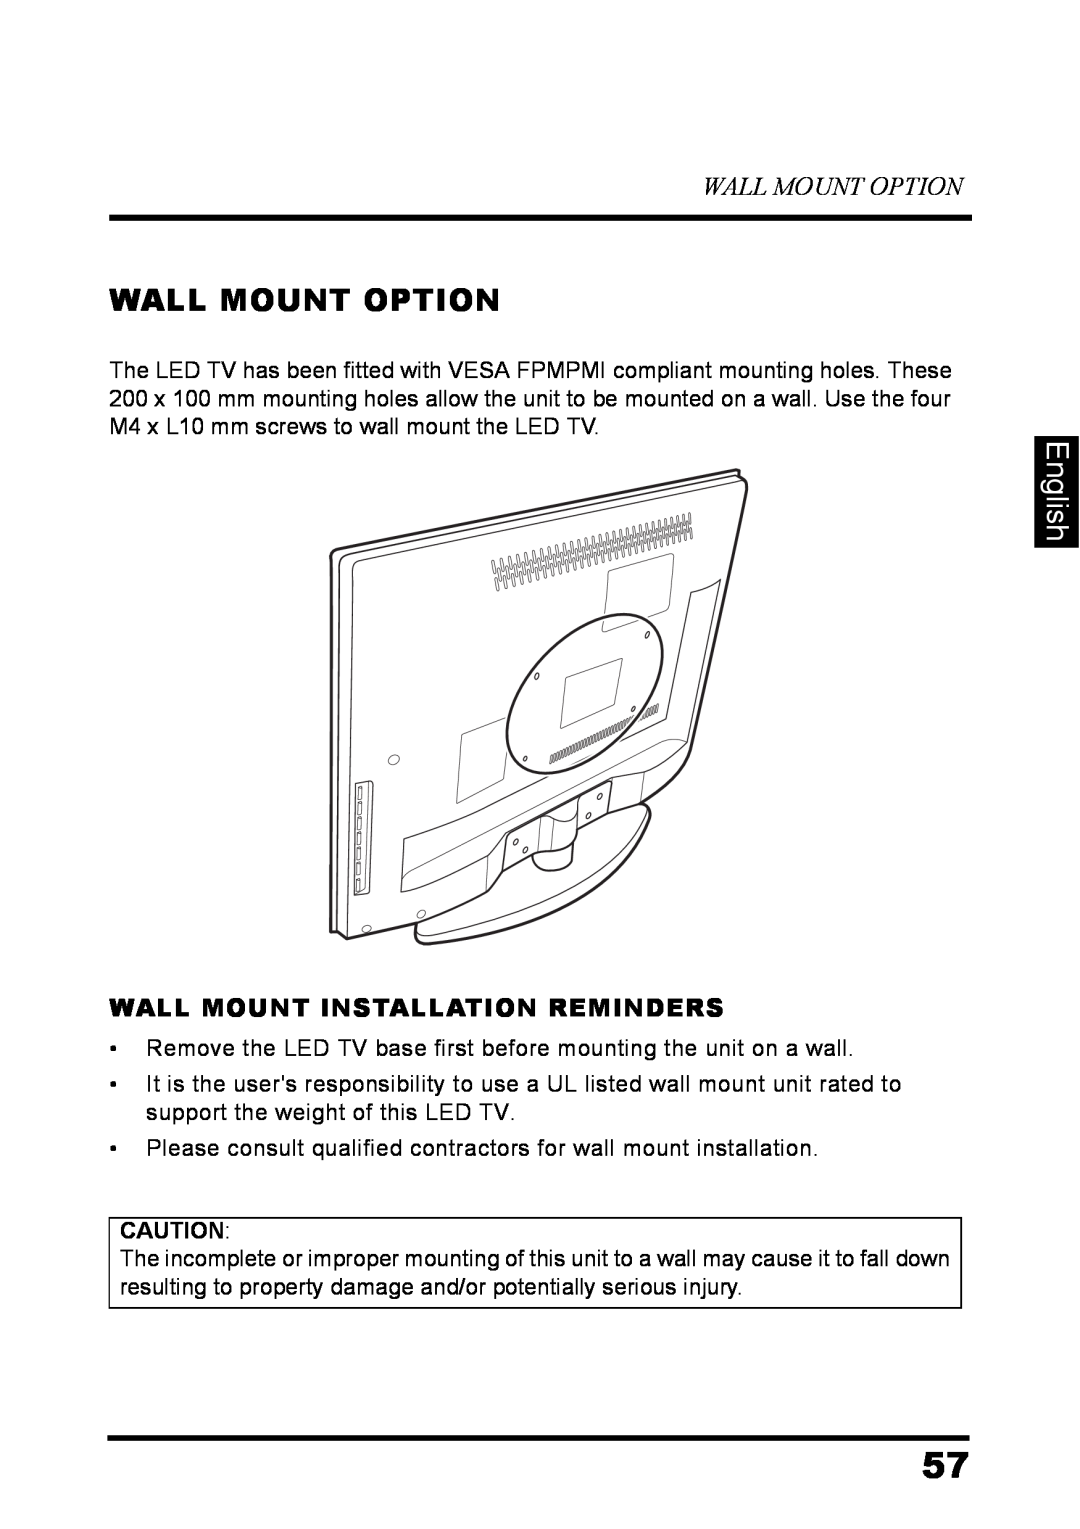 Westinghouse LD-3237 user manual Wall Mount Option, English, Wall Mount Installation Reminders 